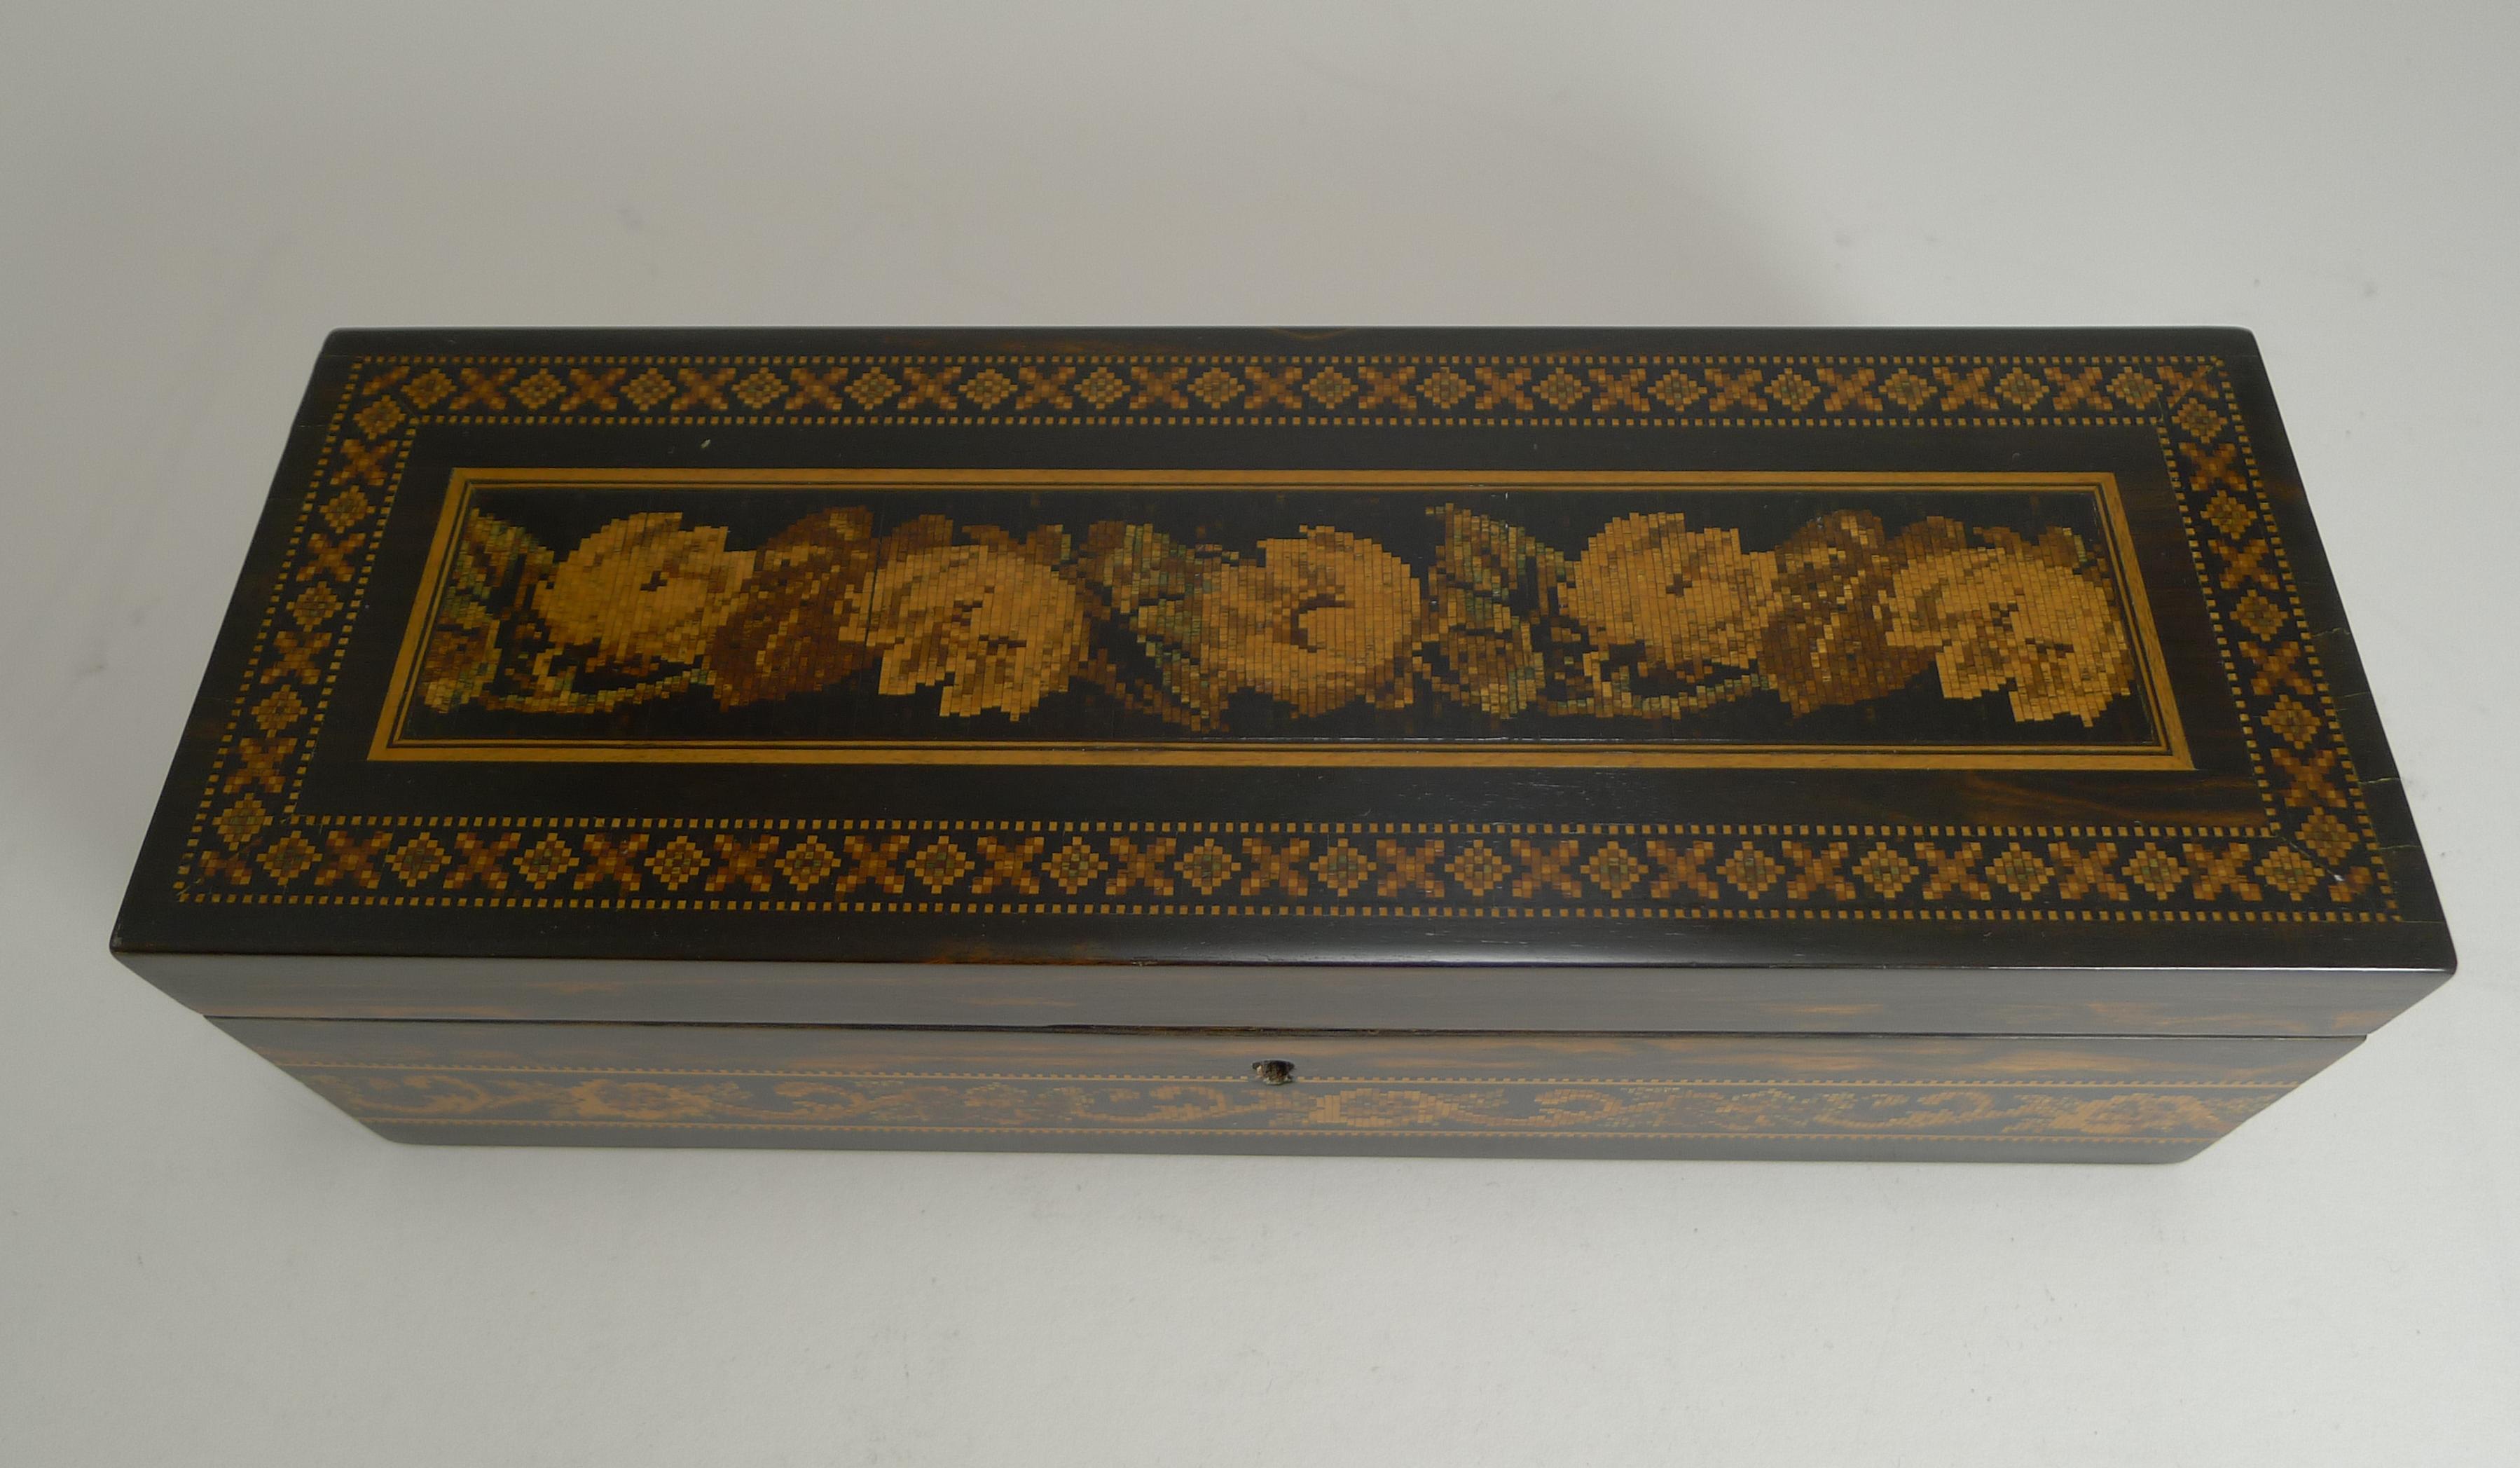 A superb glove box dating to the mid-19th century with the highly sought-after combination of exotic Coromandel wood and micro-mosaic Tunbrdige Ware / Tunbridgeware.

The interior has been professionally re-lined in a hand-marbelled paper and the